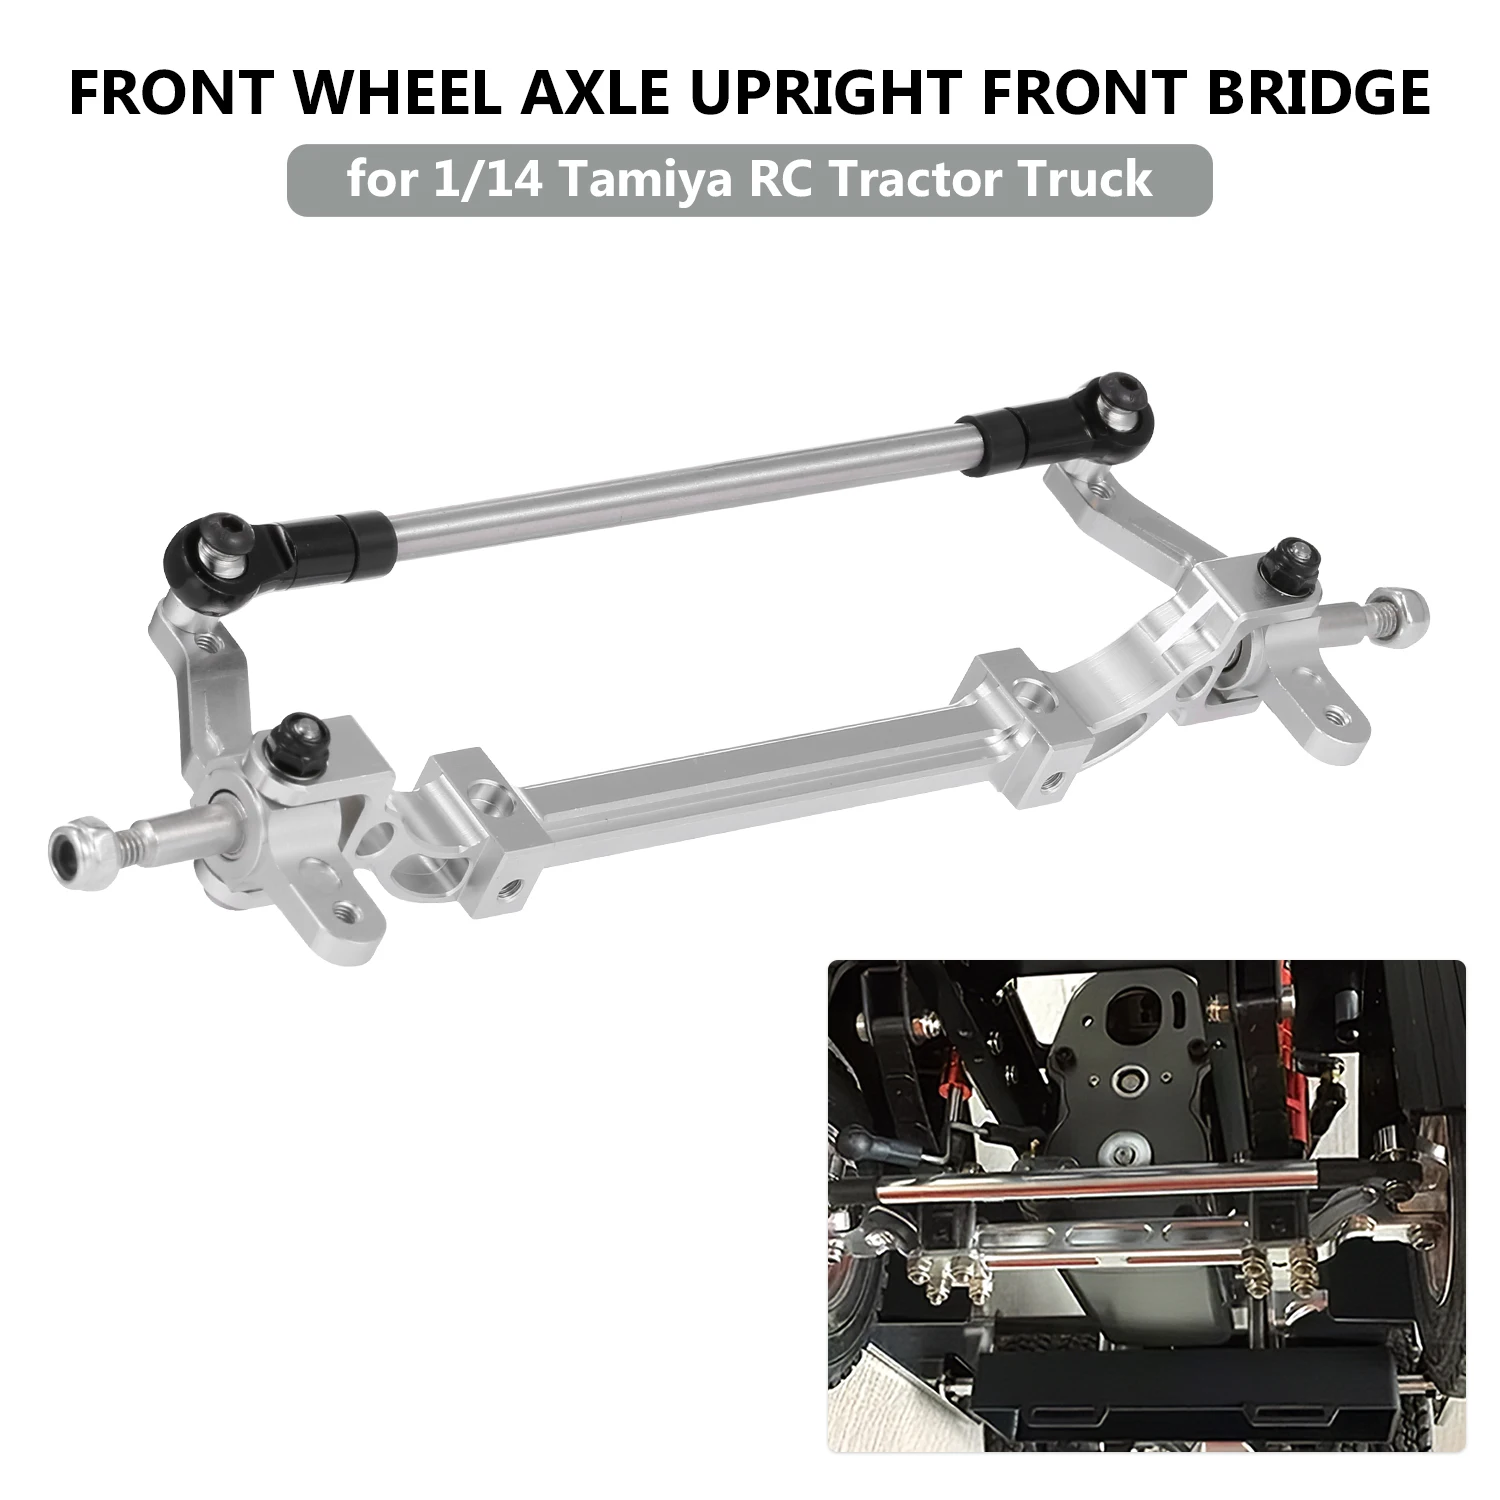 

Alloy Front Wheel Axle Upright Front Bridge RC Car Parts for 1/14 Tamiya Tractor Truck RC Climber Trailer